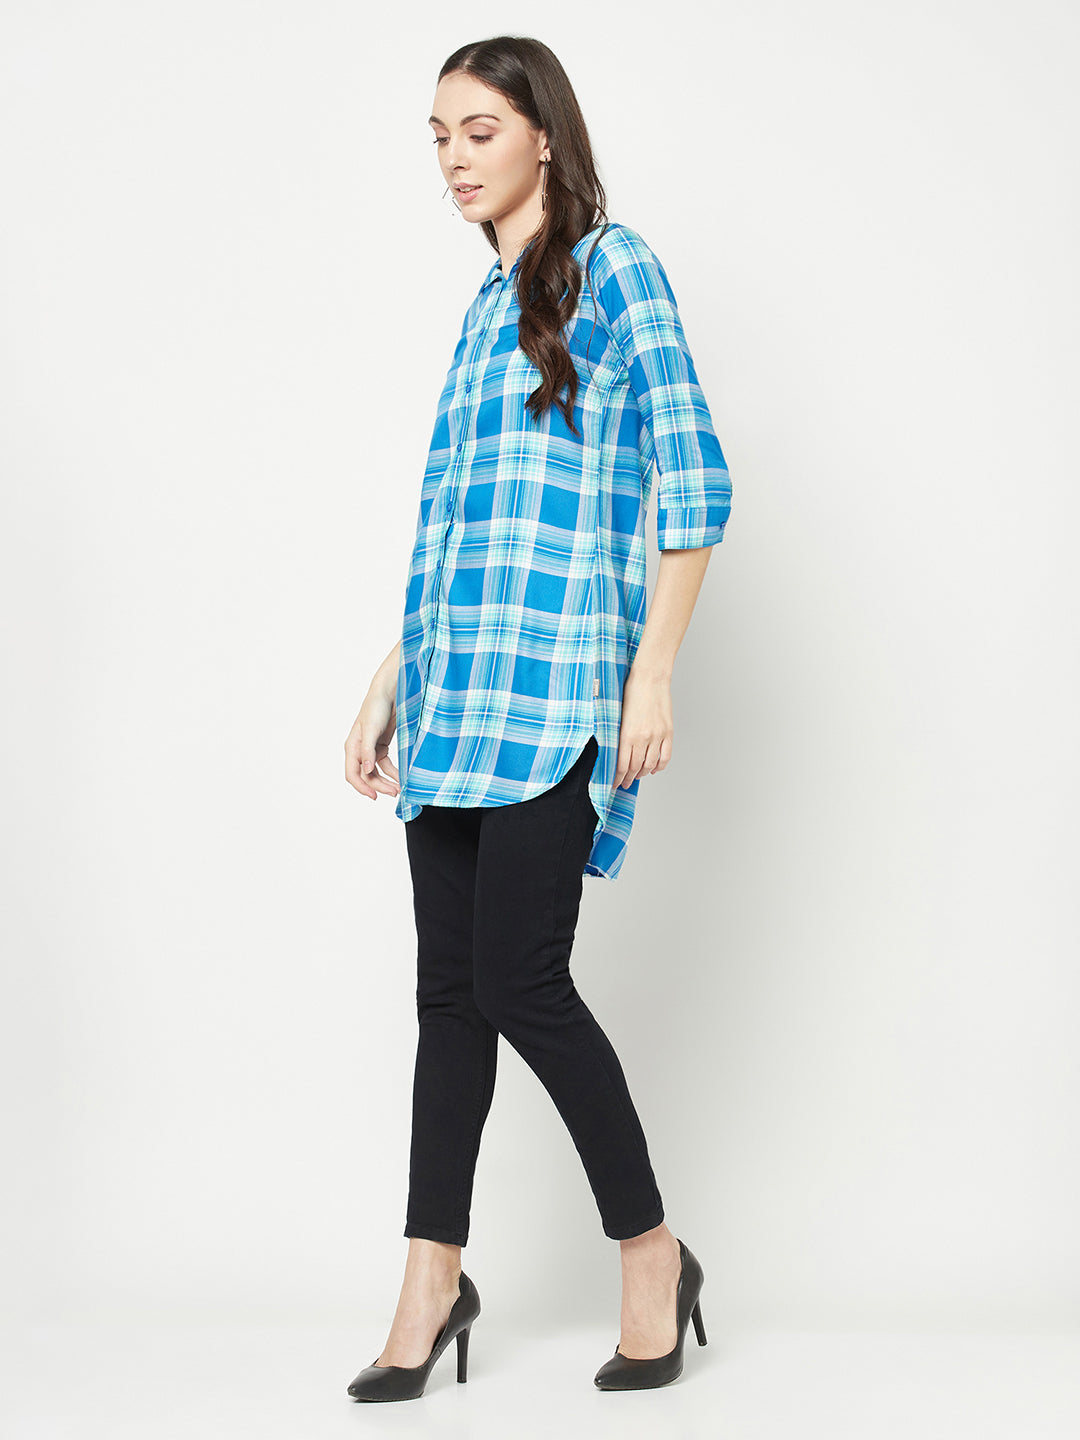  Turquoise Checked Longline Shirt